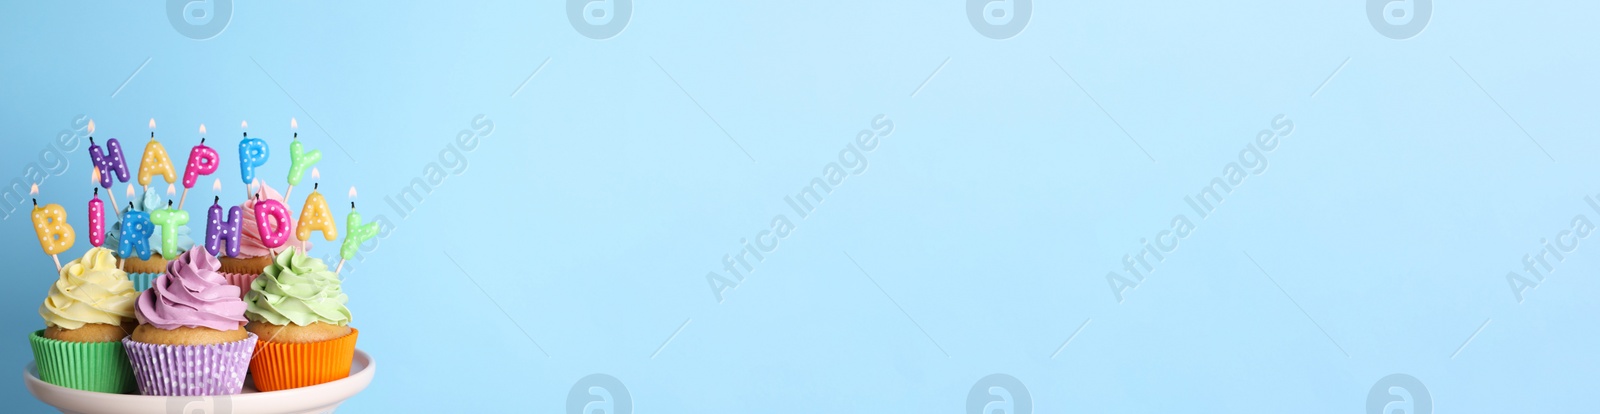 Photo of Birthday cupcakes with burning candles on stand against light blue background. Space for text